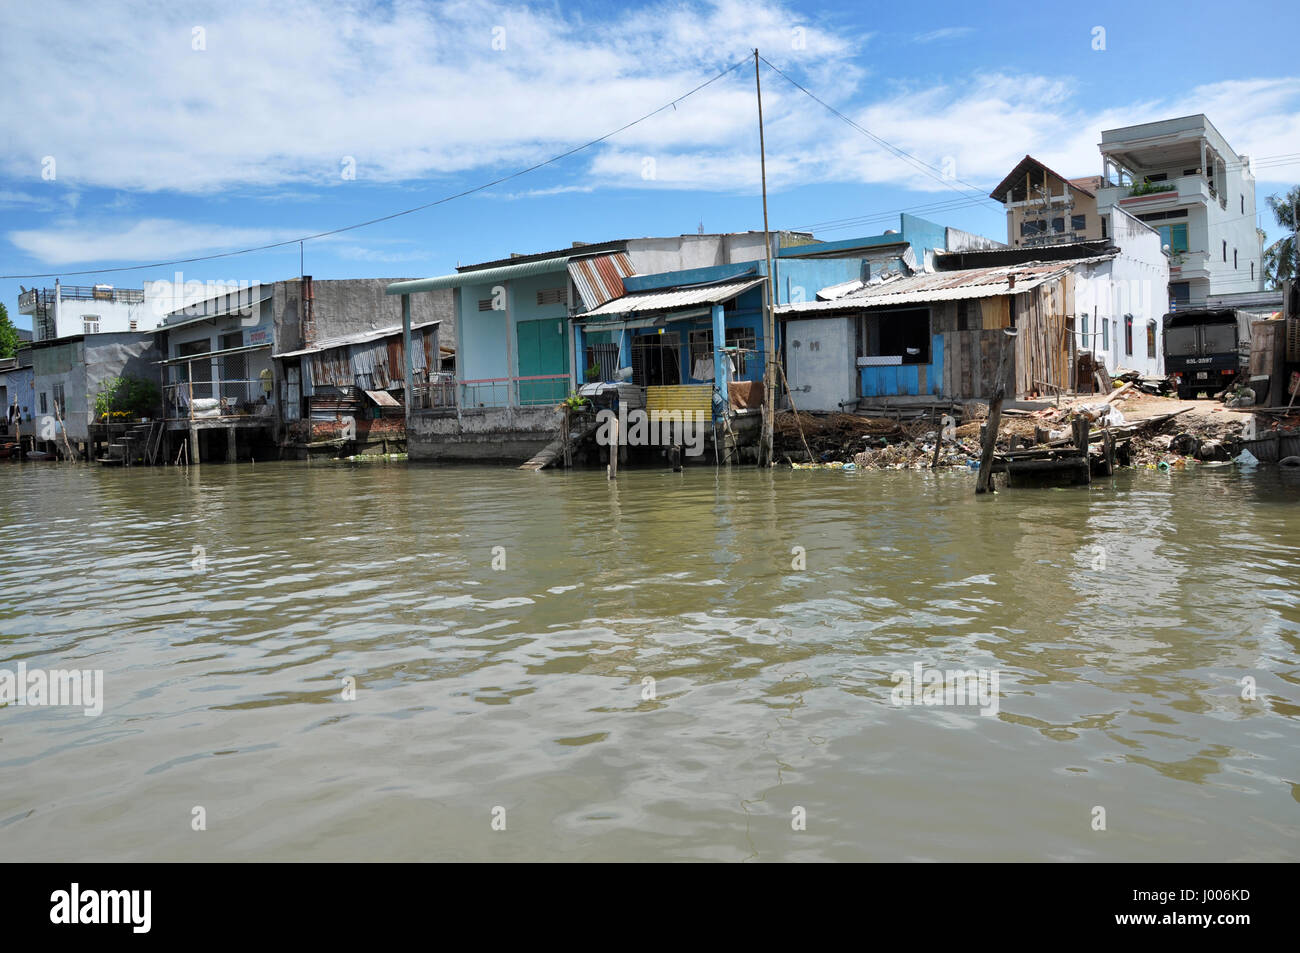 CAN THO, VIETNAM - FEBRUARY 17, 2013: Typical shack homes, riverside stils houses along the Mekong Delta. People from the suburbs are living in povert Stock Photo